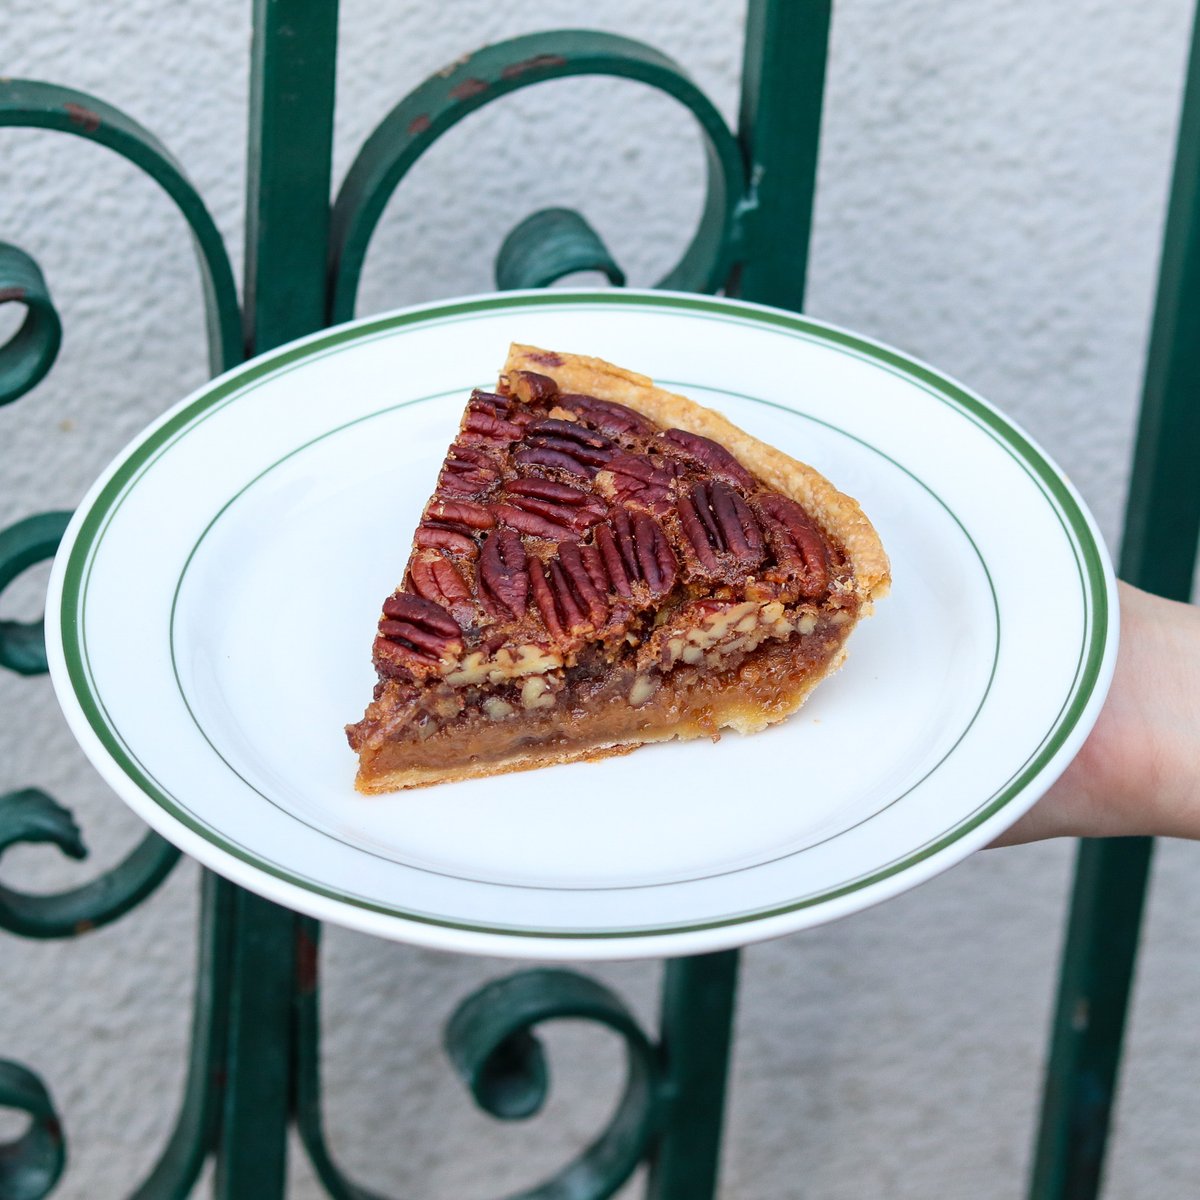 Are you NUTS for our Pecan Pie? Be sure to place your Thanksgiving pre-order today! Link in bio 😋 #pecan #pecanpie #thanksgiving #pie #dessert #homemade #madefromscratch #nuts #qualityforever